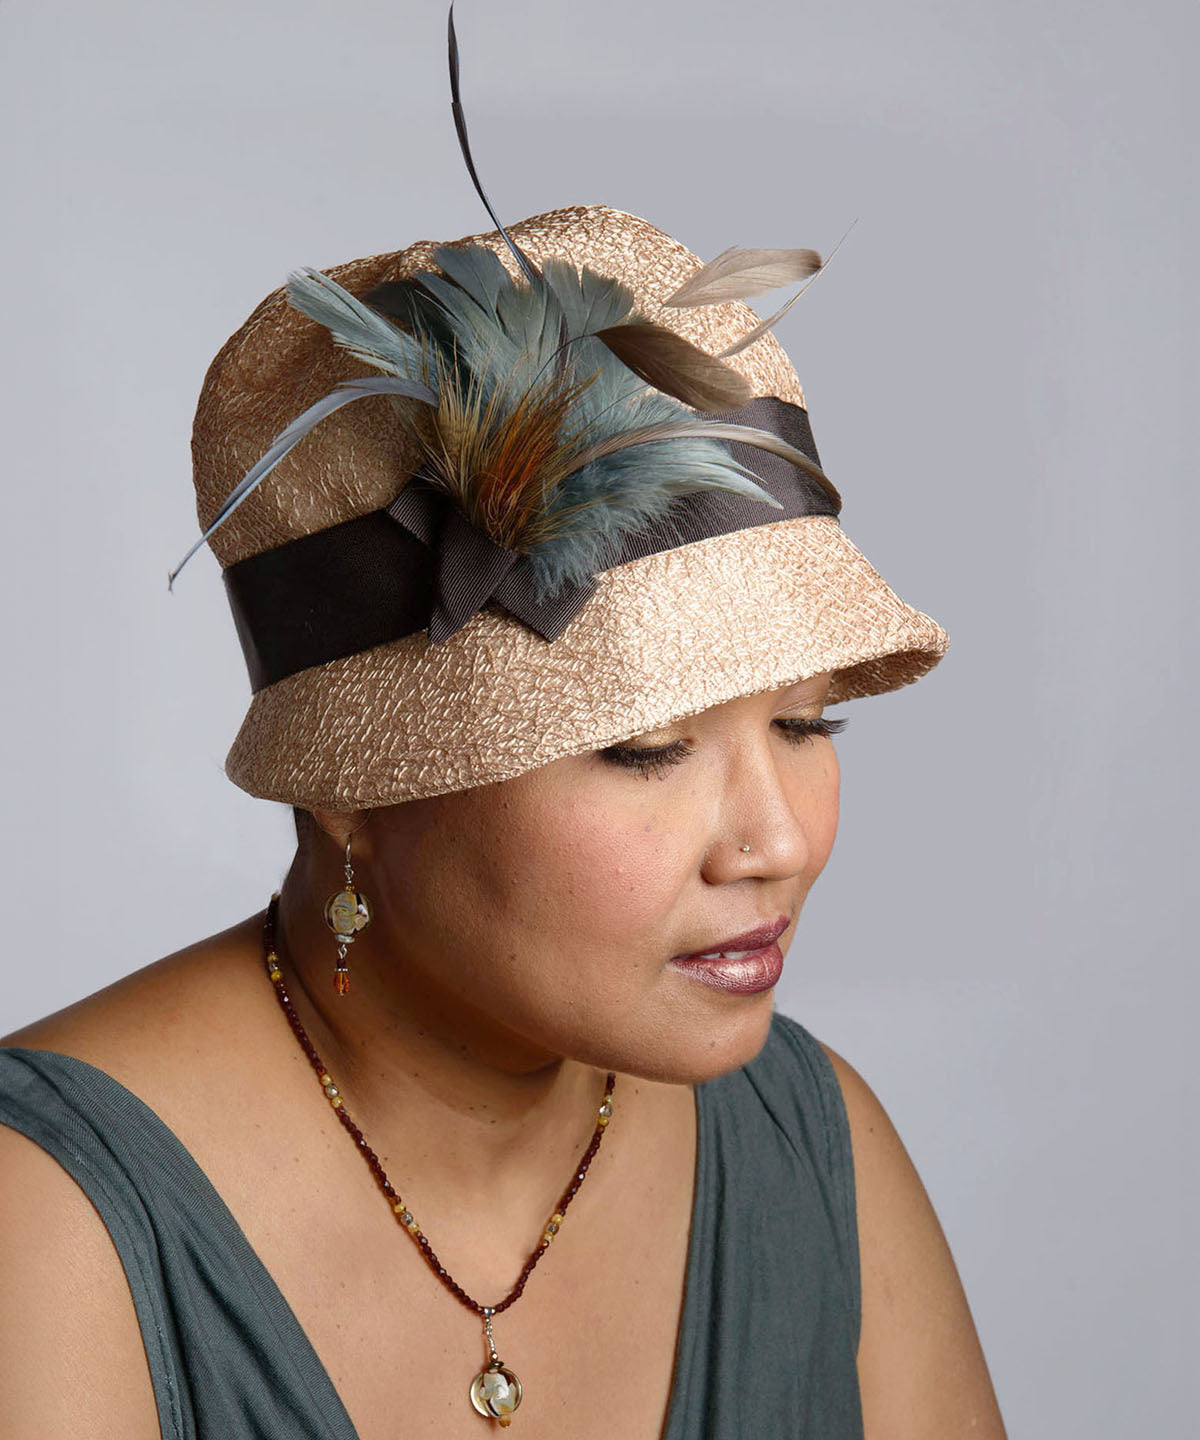 Grace Cloche Style Hat Tumbleweed in Champagne with Navy Grosgrain featuring Large Custom Flower Brooch | By Pandemonium Millinery | Handmade in Seattle WA USA